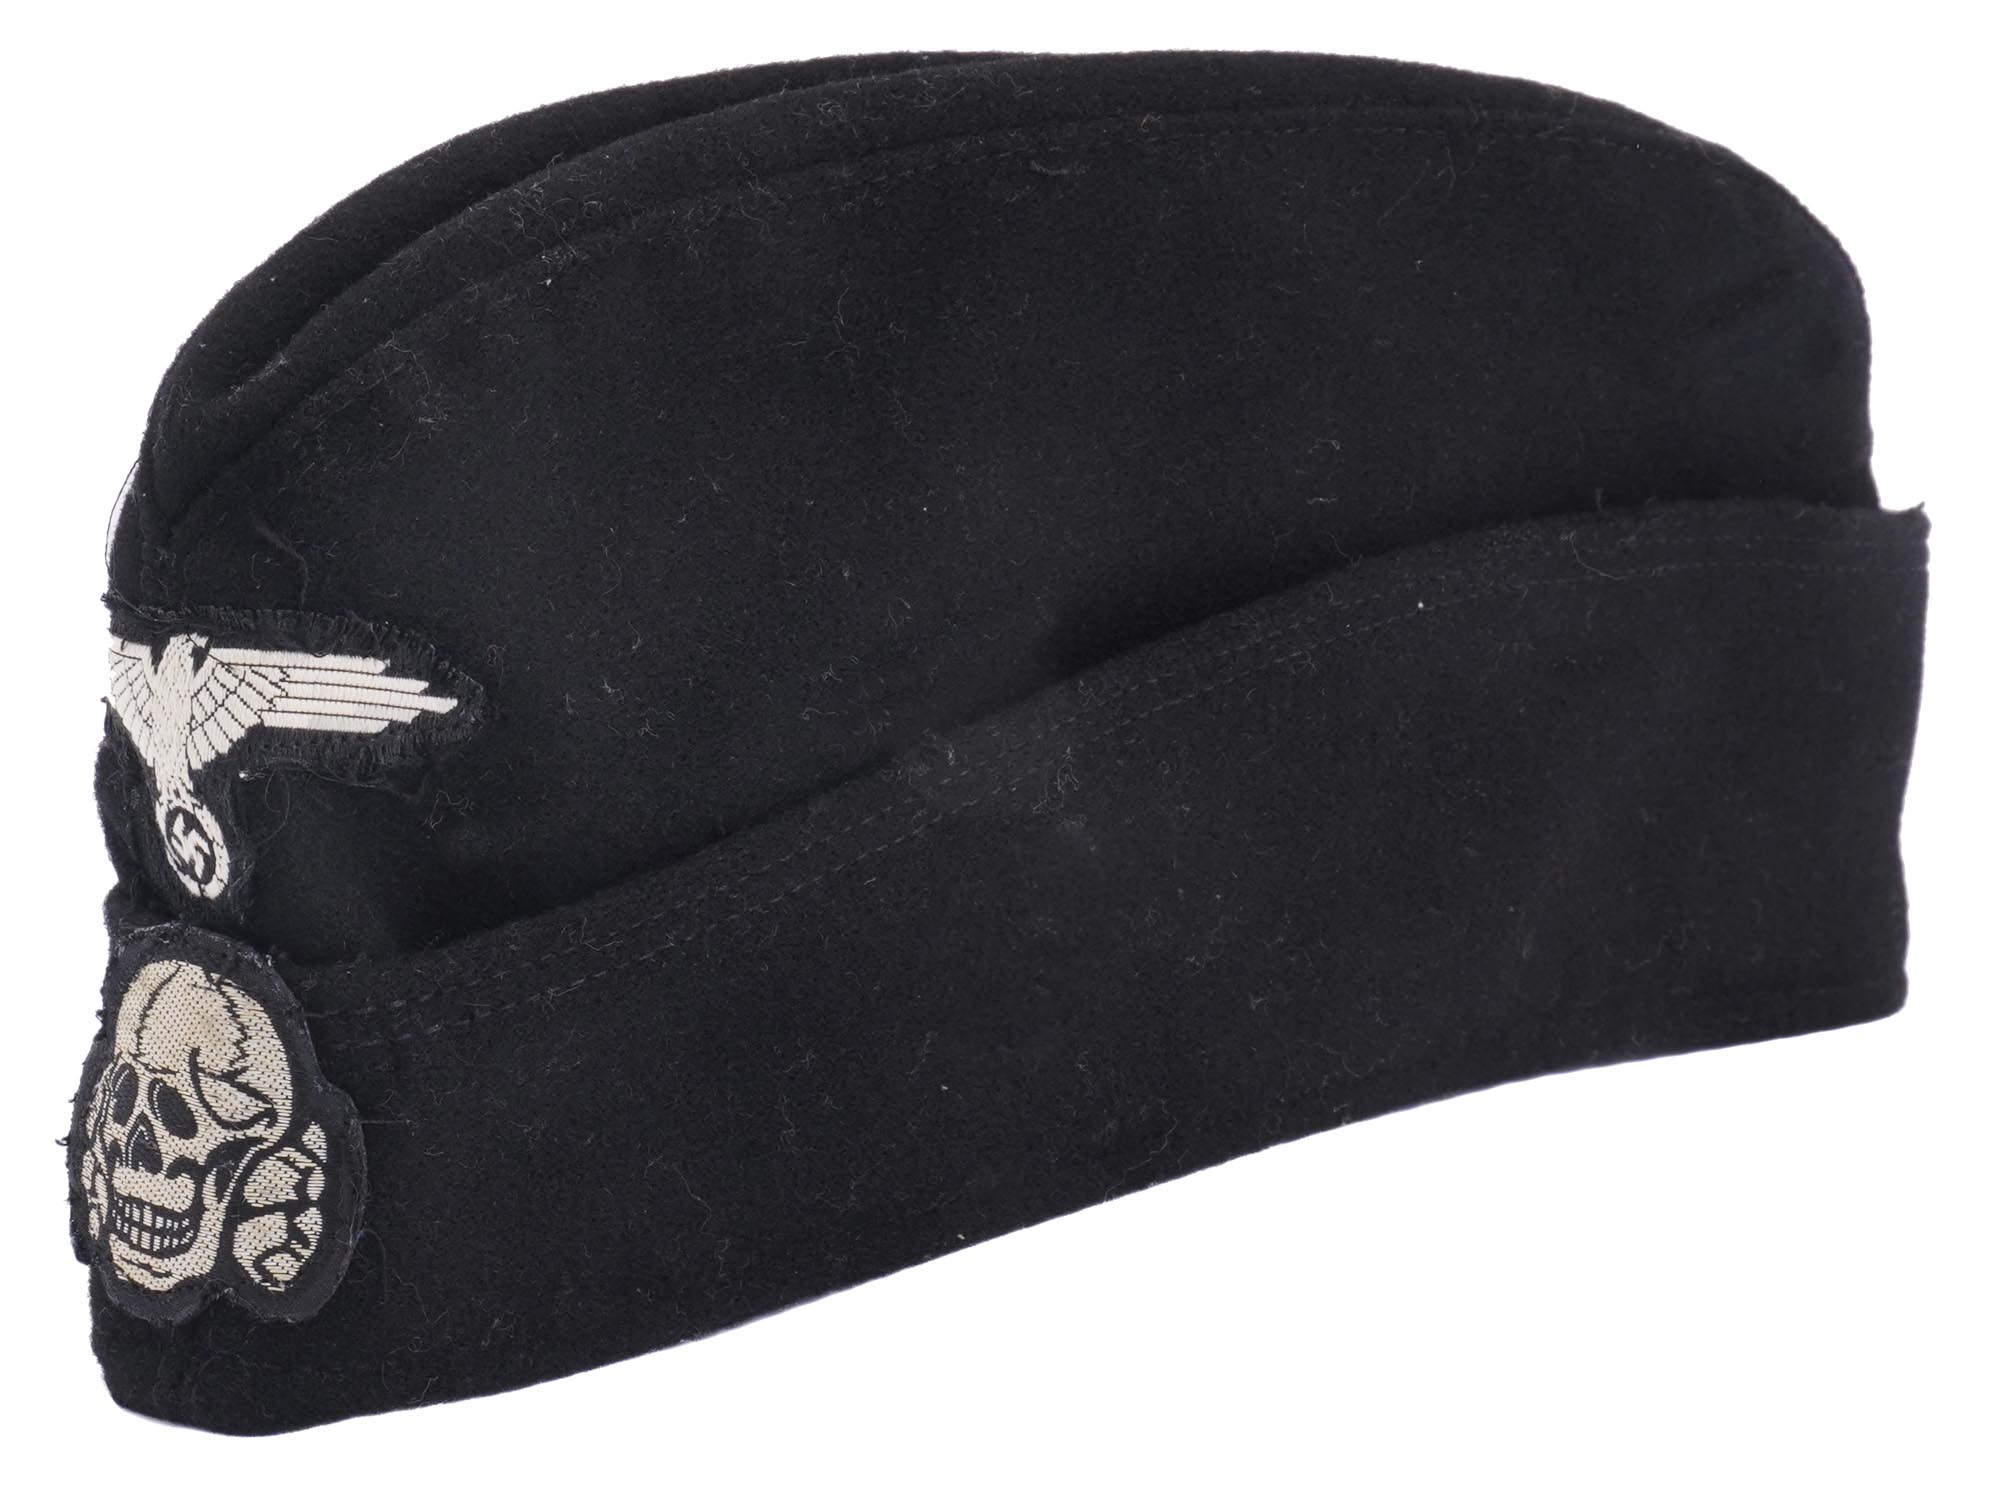 WWII NAZI GERMAN MILITARY SS OFFICERS FORAGE CAP PIC-0